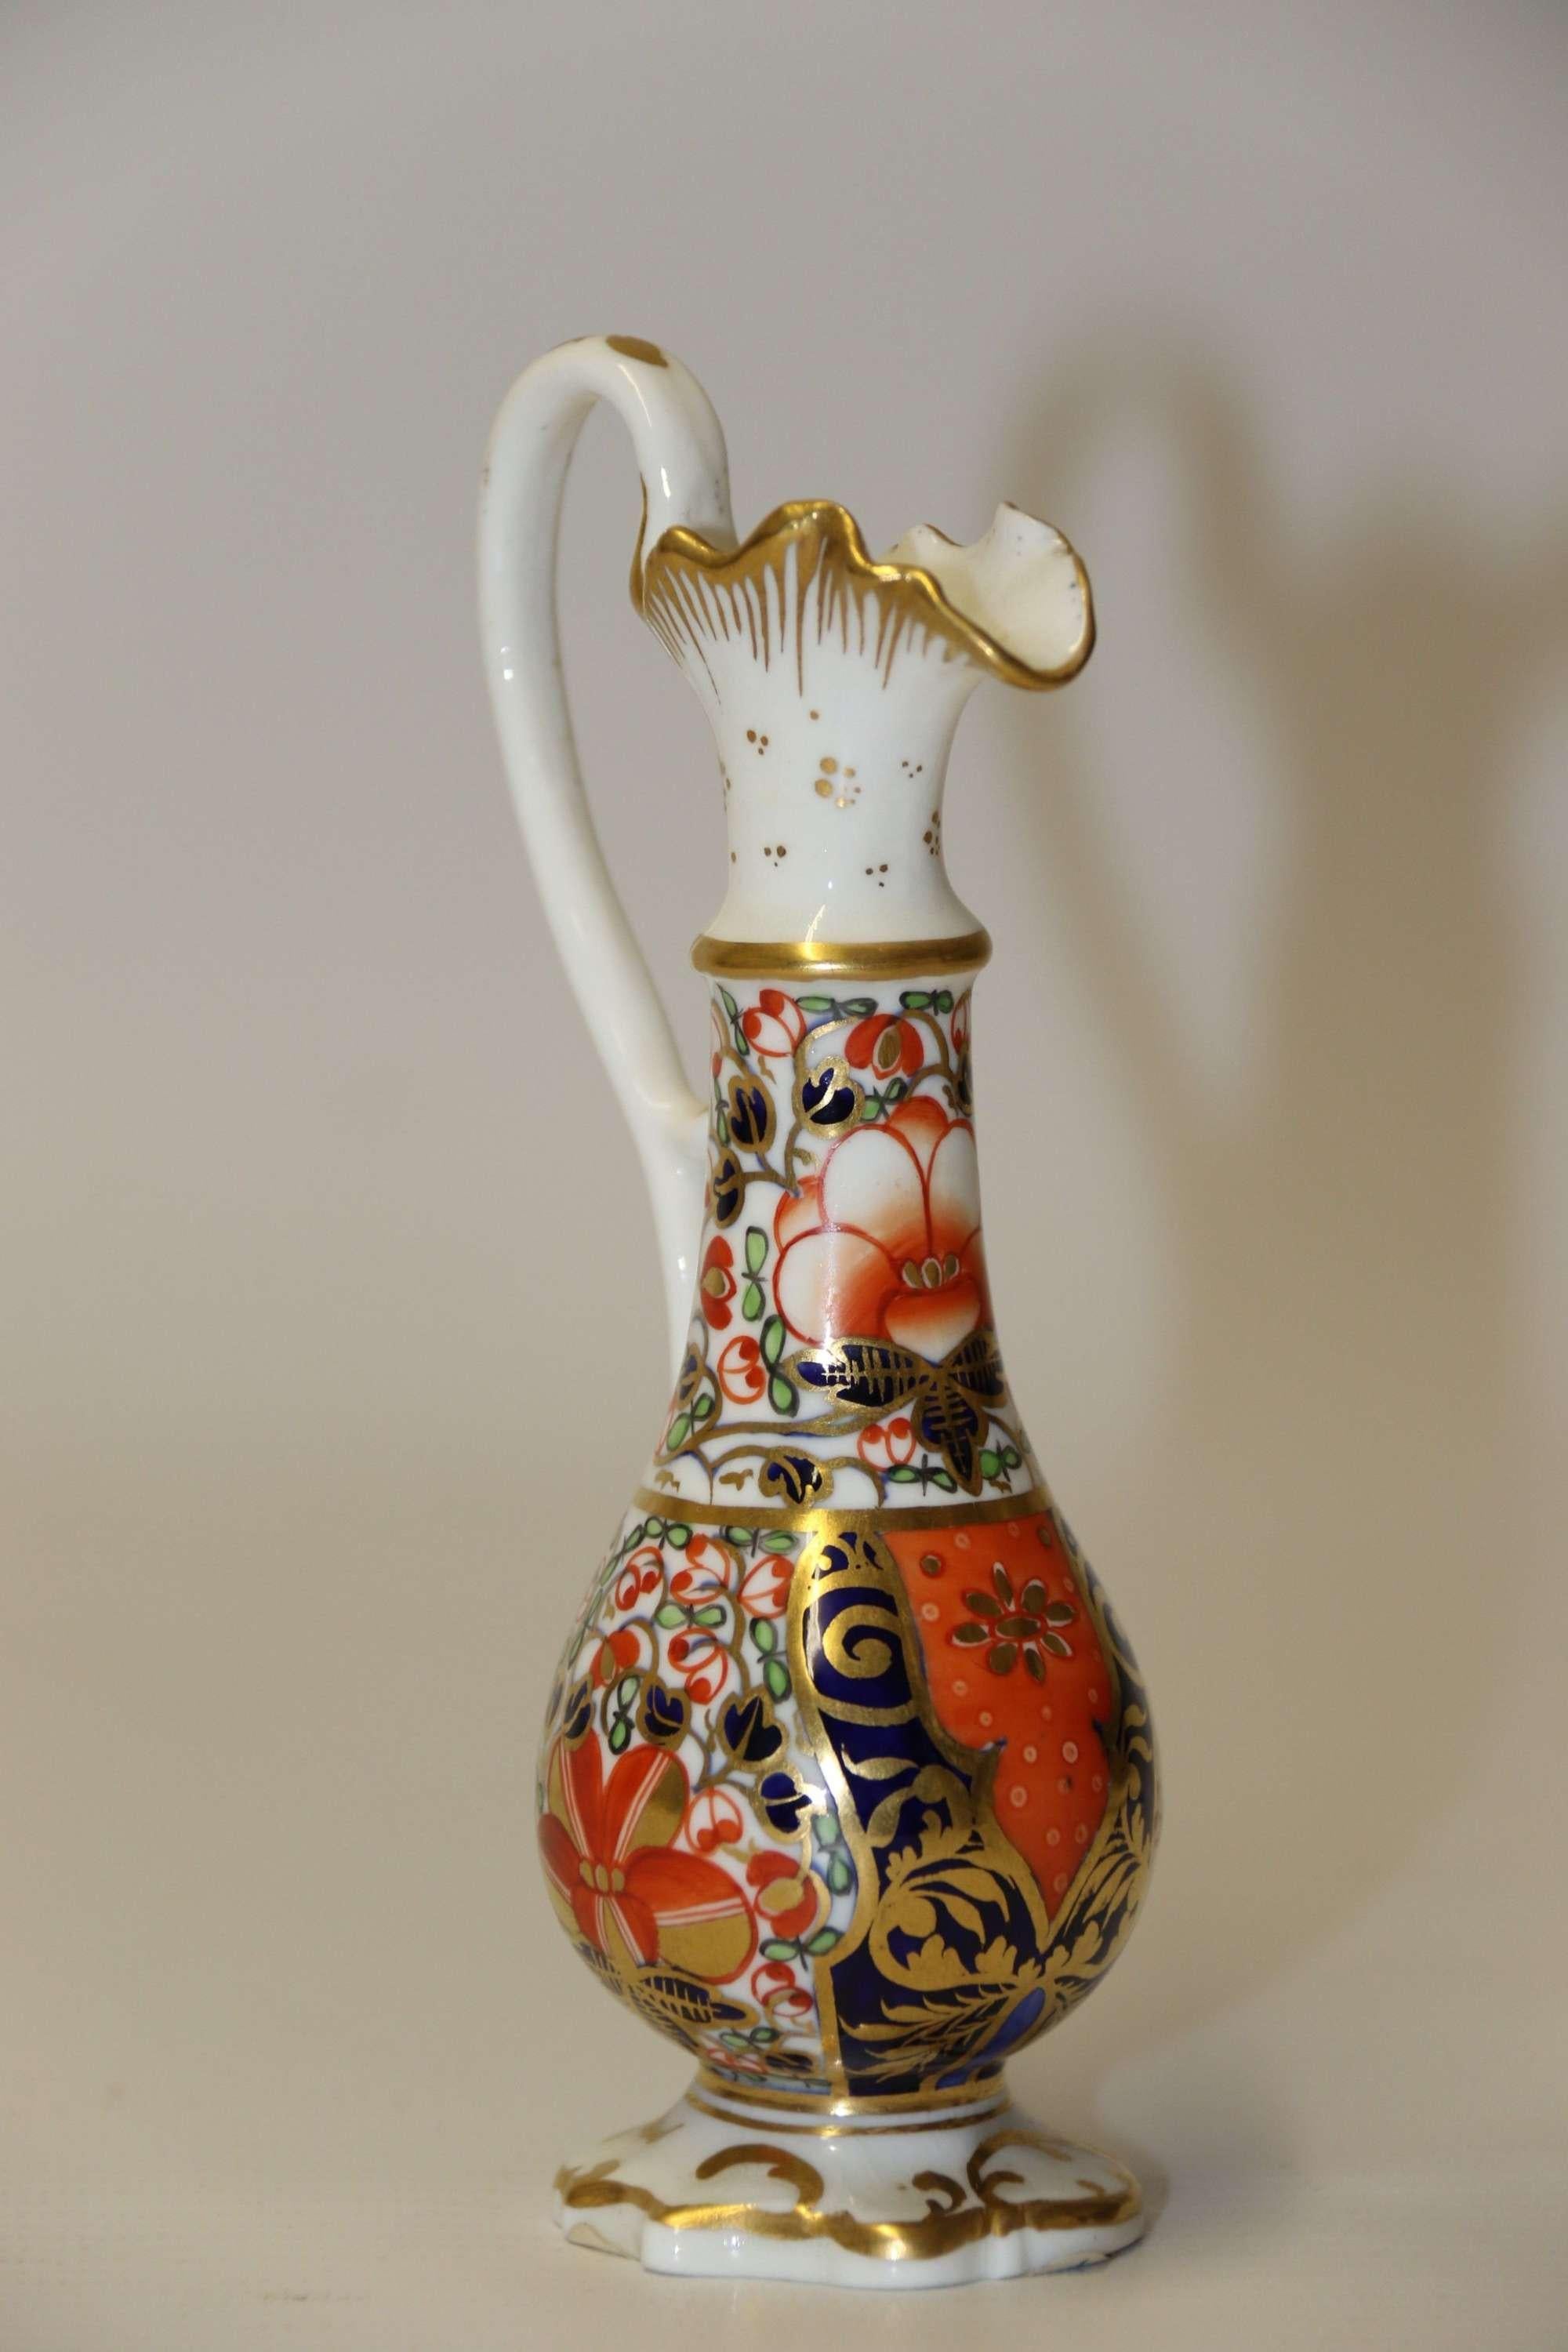 An Antique English Mid 19th Century Hand Painted Derby Ewer

This elegant mid 19th century English Derby Ewer is of a slender design with a scrolled handle and a shaped foot. The main body is beautifully hand painted with flowers and foliage in rich